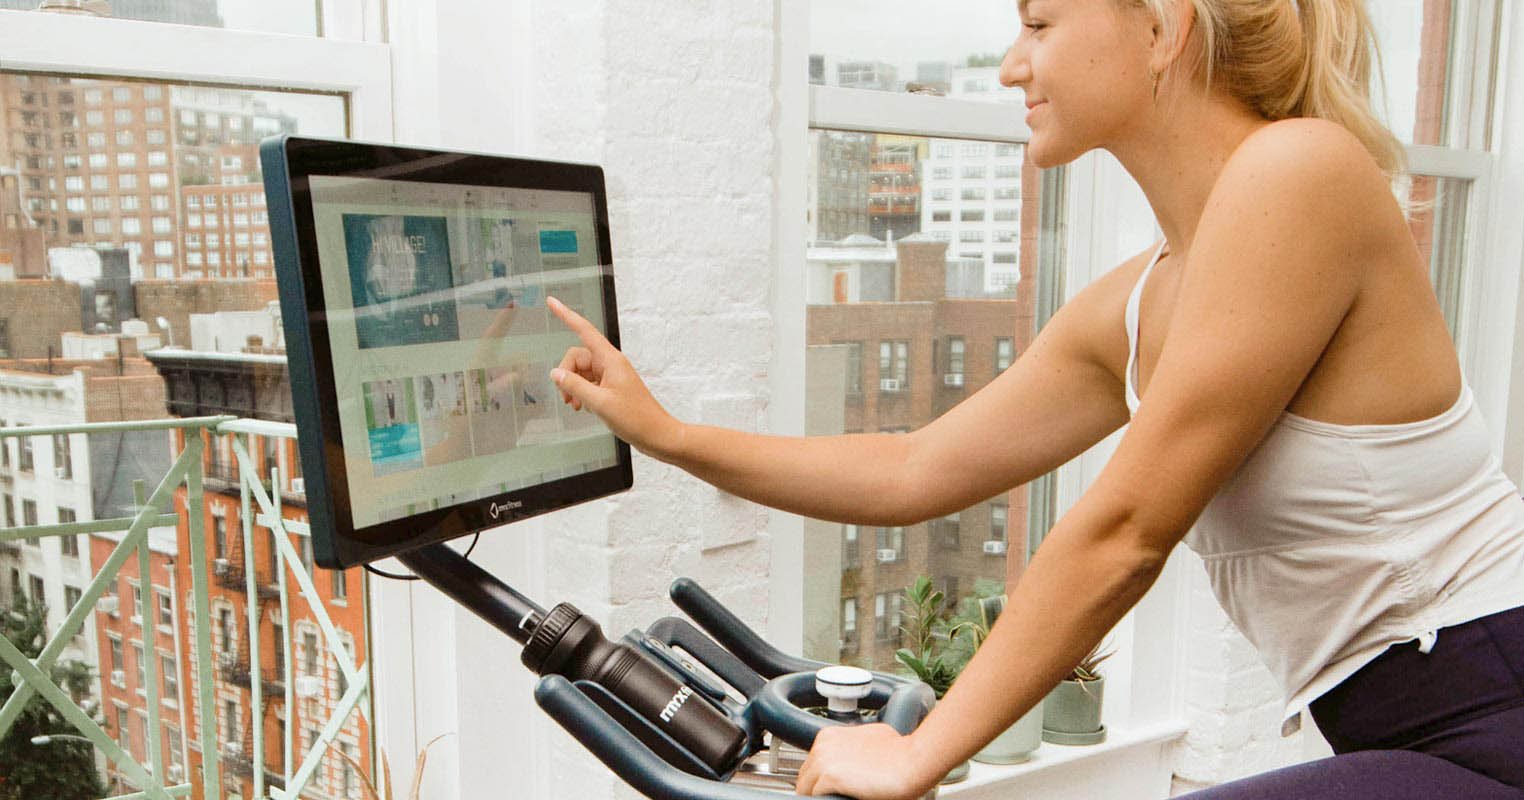 The 10 Best Peloton Alternatives for At-Home Workouts, According to Users